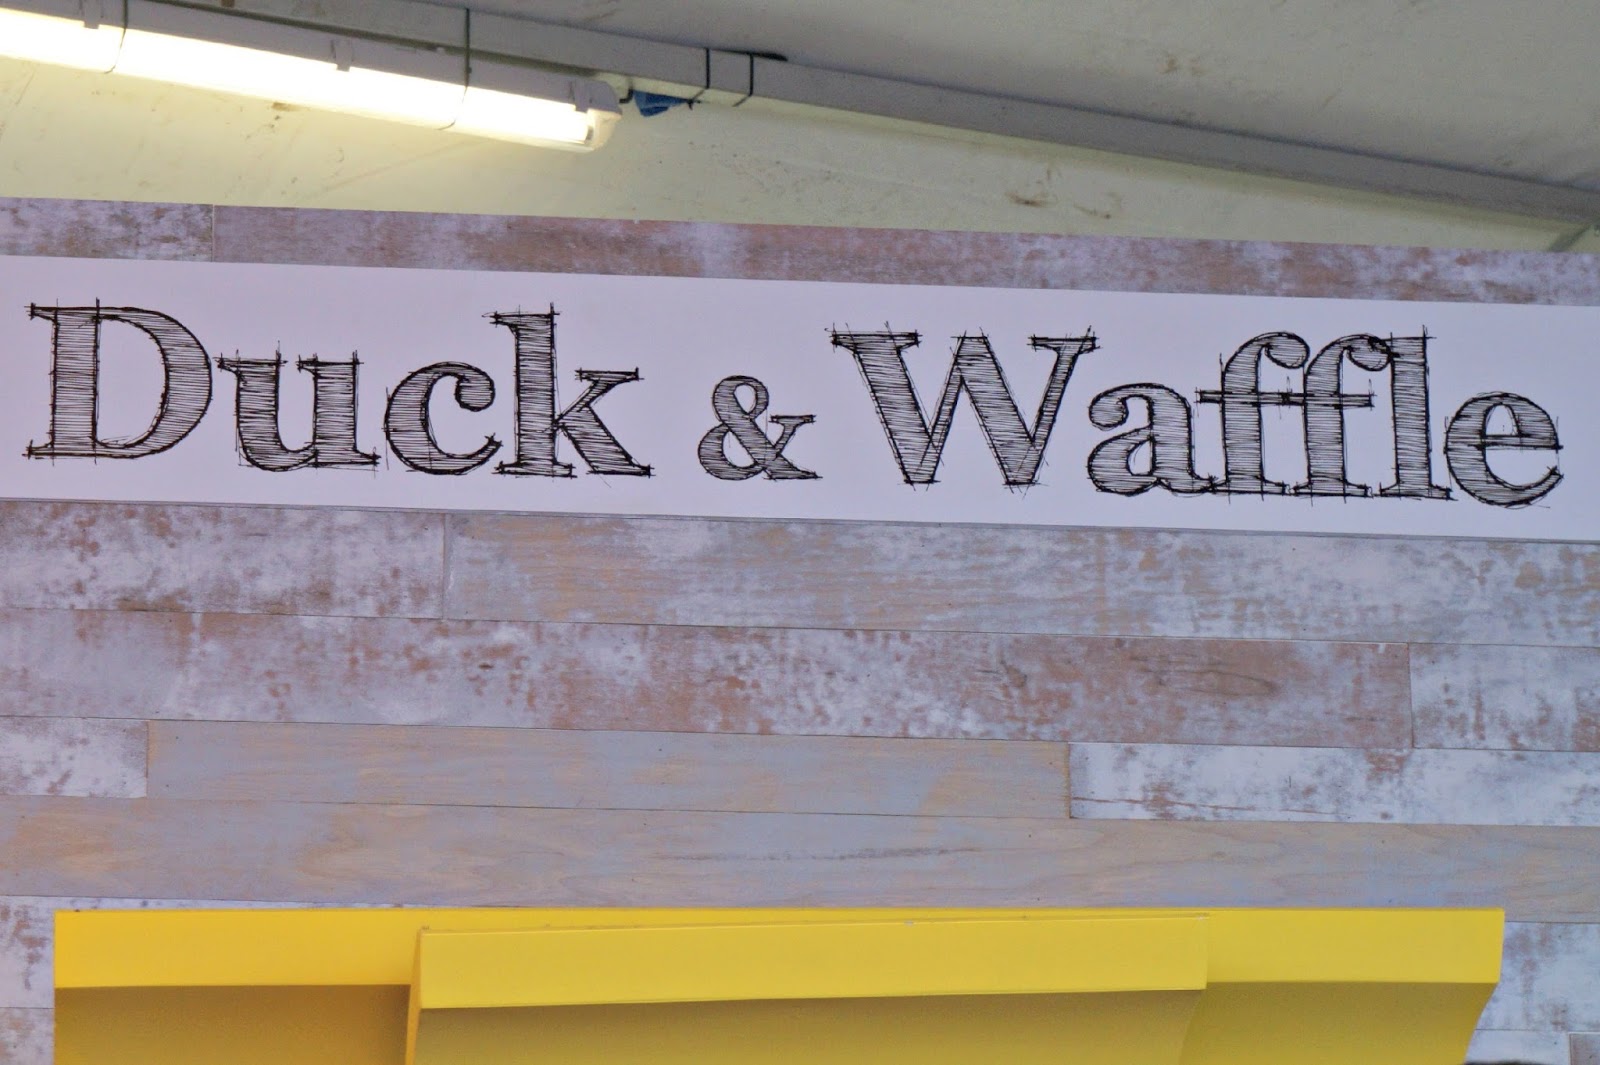 Duck-and-waffle